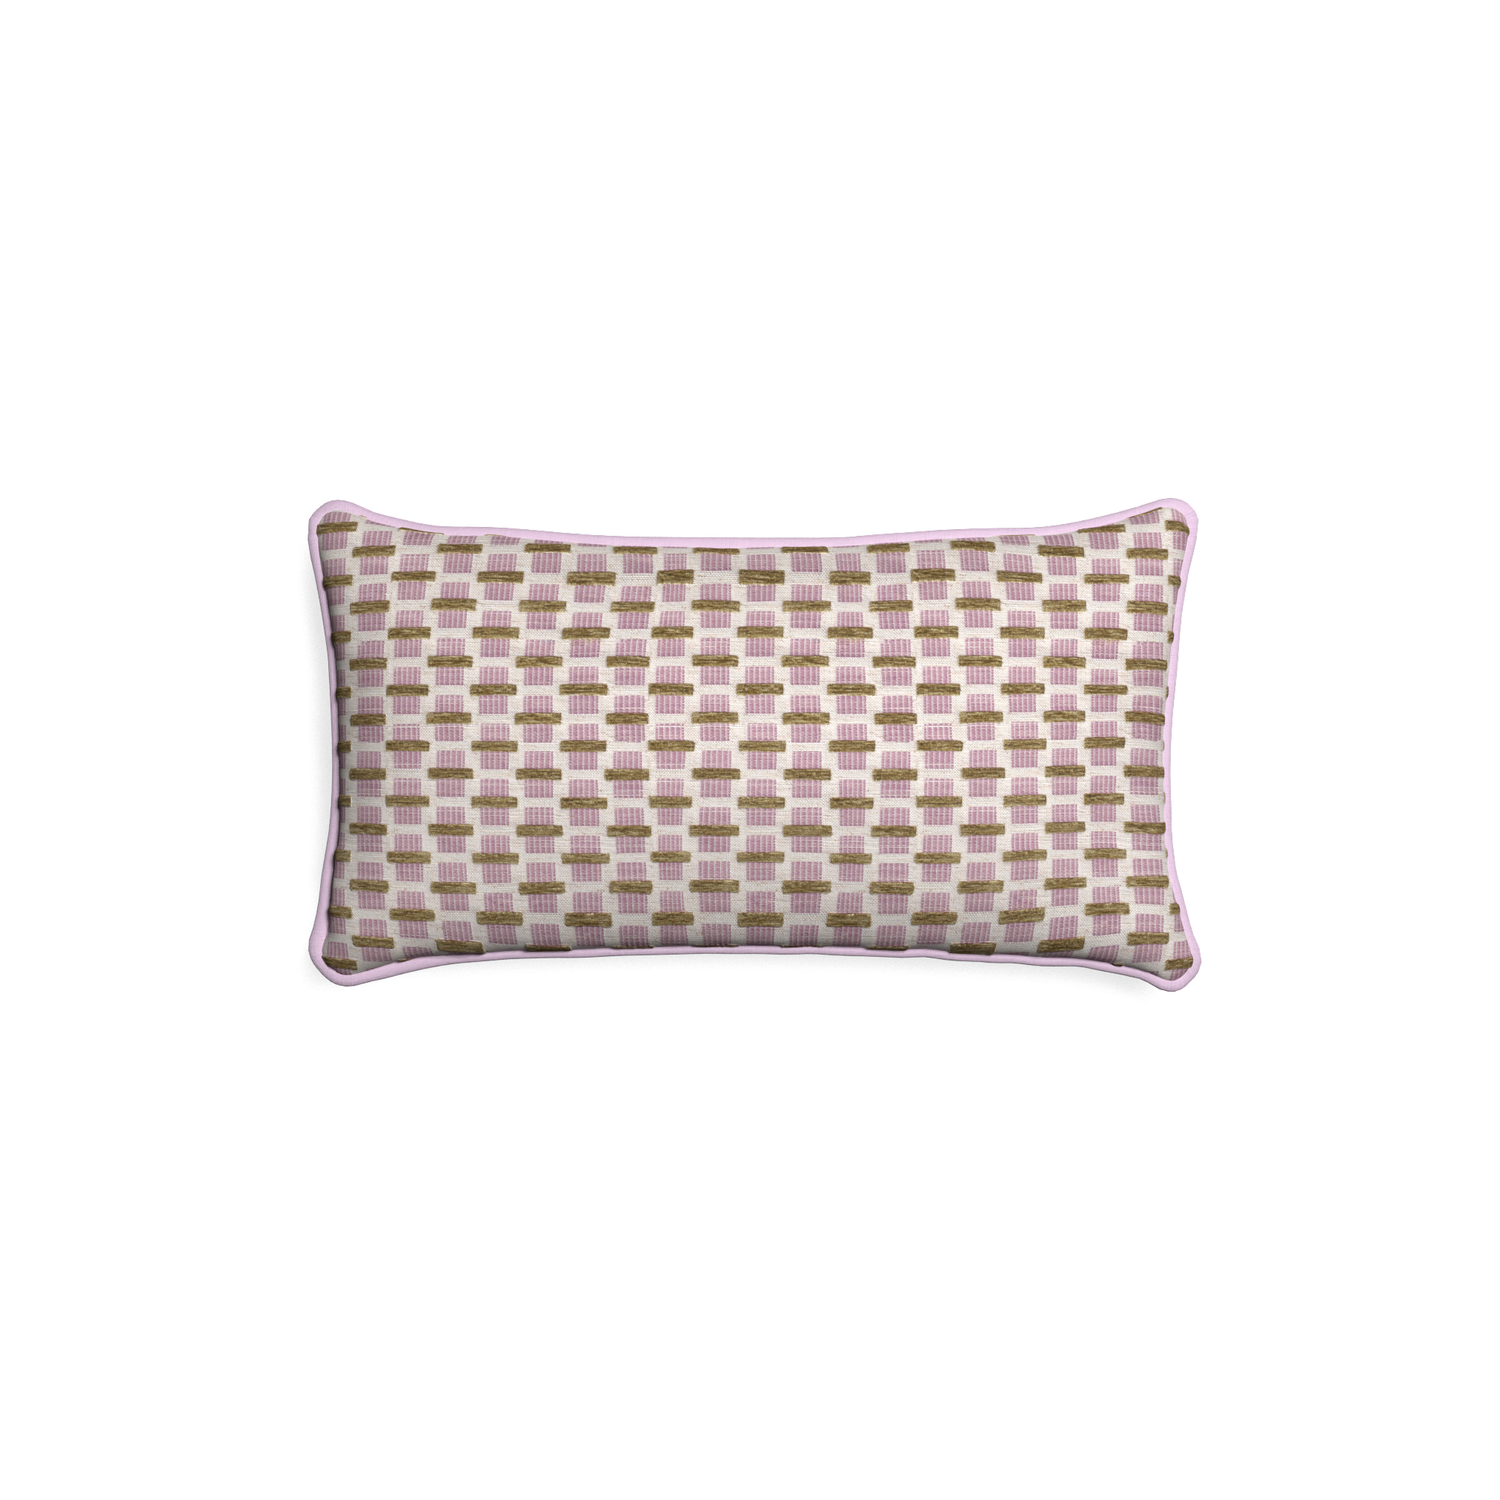 Petite-lumbar willow orchid custom pink geometric chenillepillow with l piping on white background